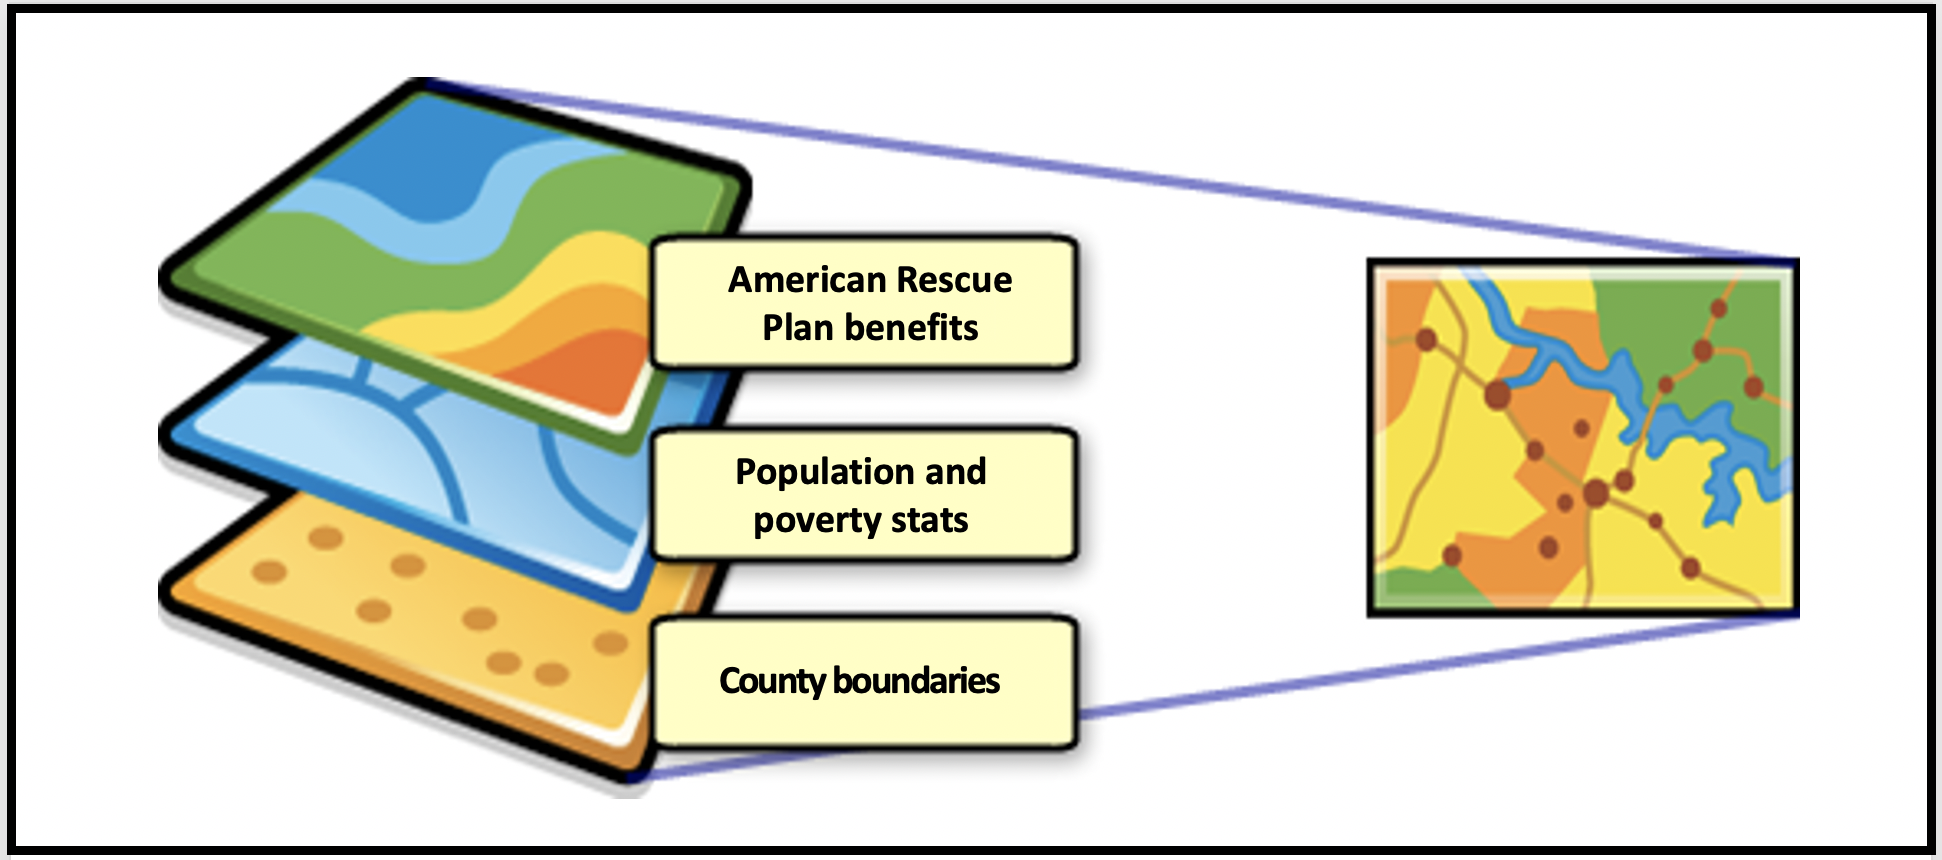 A good map represents information in different layers which makes them easier to search and understand.